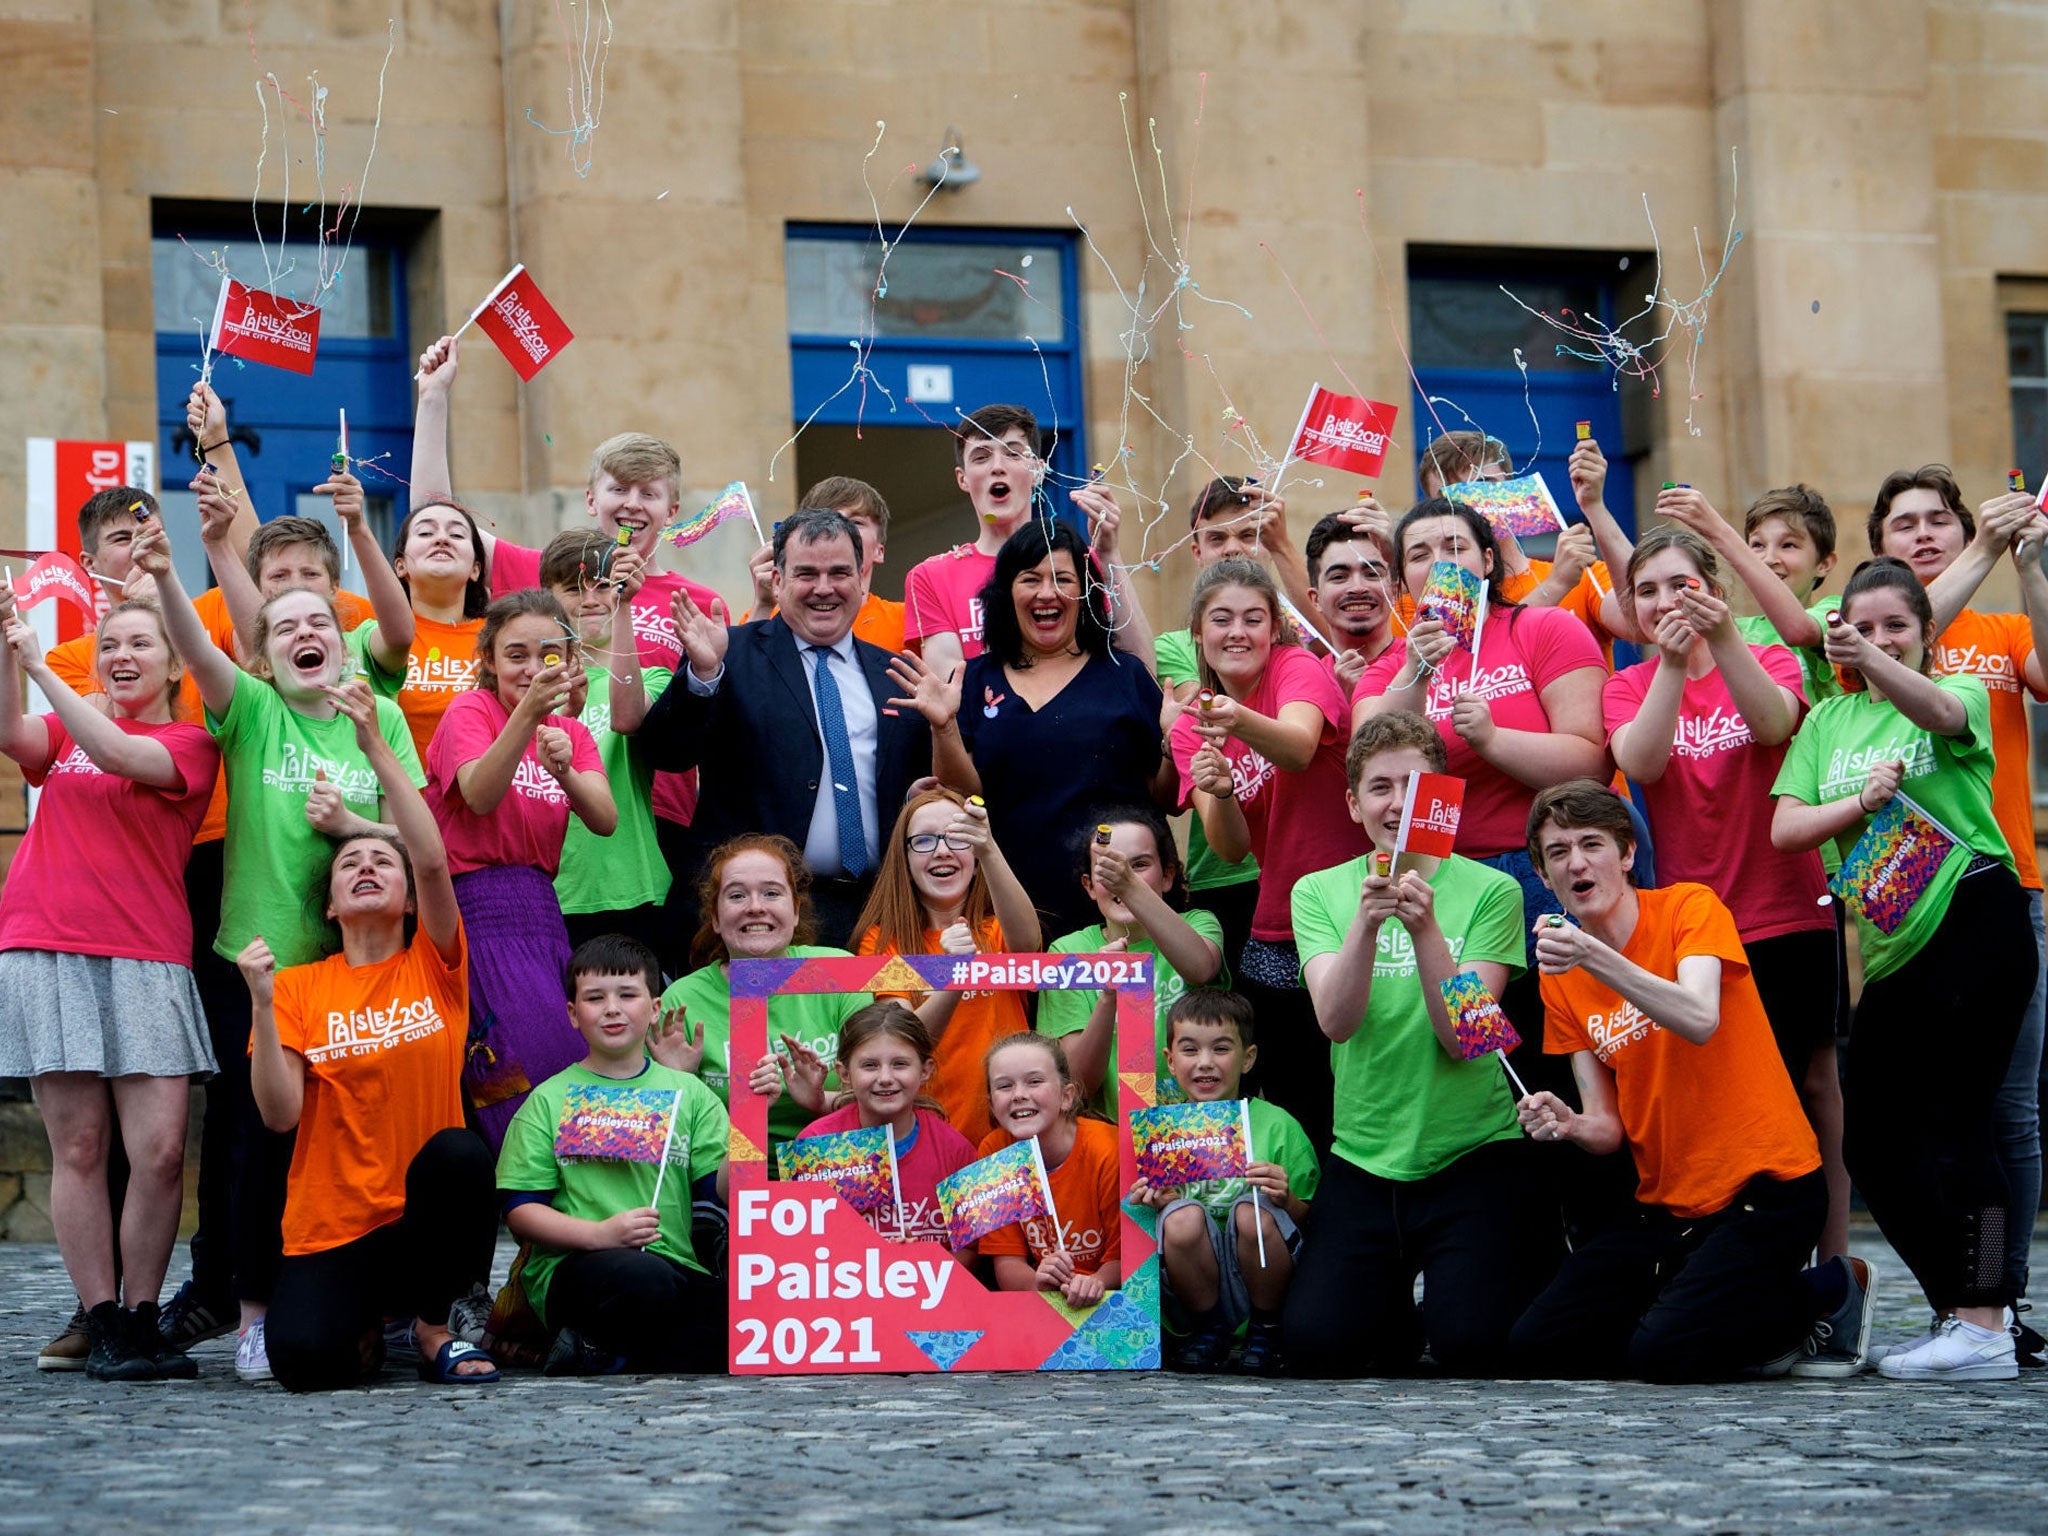 The team behind Paisley’s bid to become UK City of Culture 2021 has said they are ‘in it to win it’